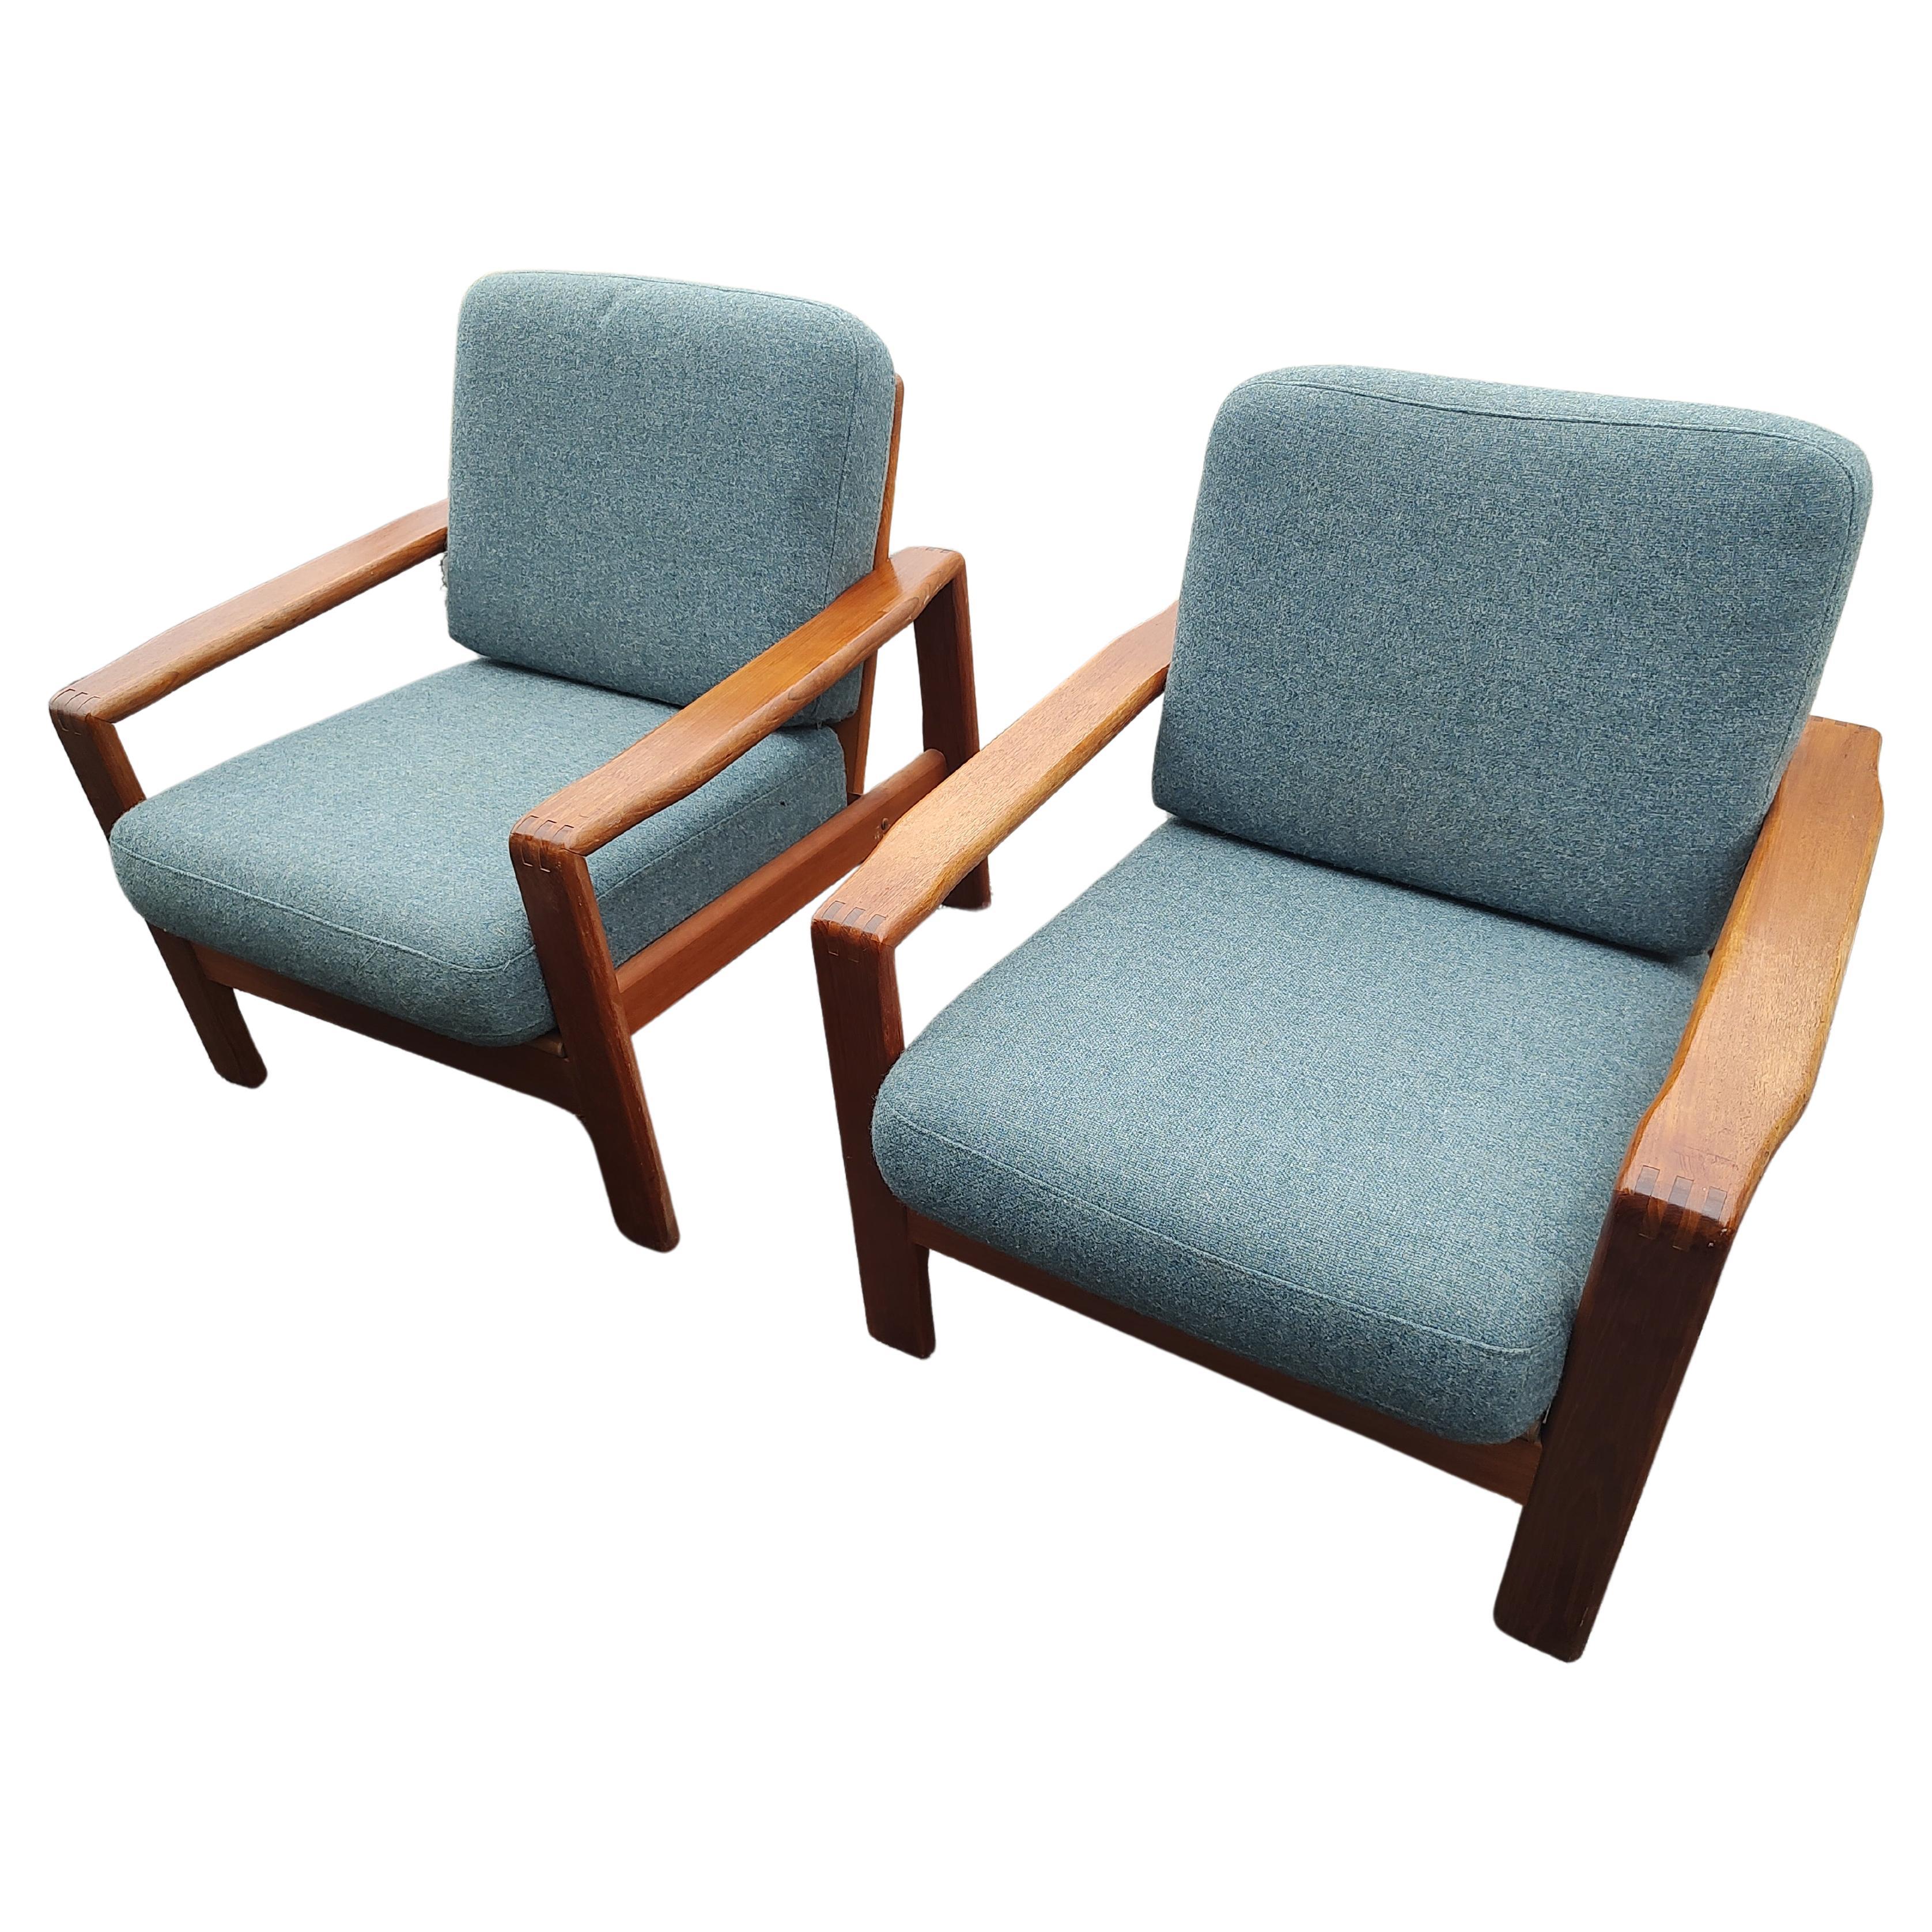 Mid Century Modern Danish Teak 3pc set Pair of Armchairs with Matching Ottoman  In Good Condition For Sale In Port Jervis, NY